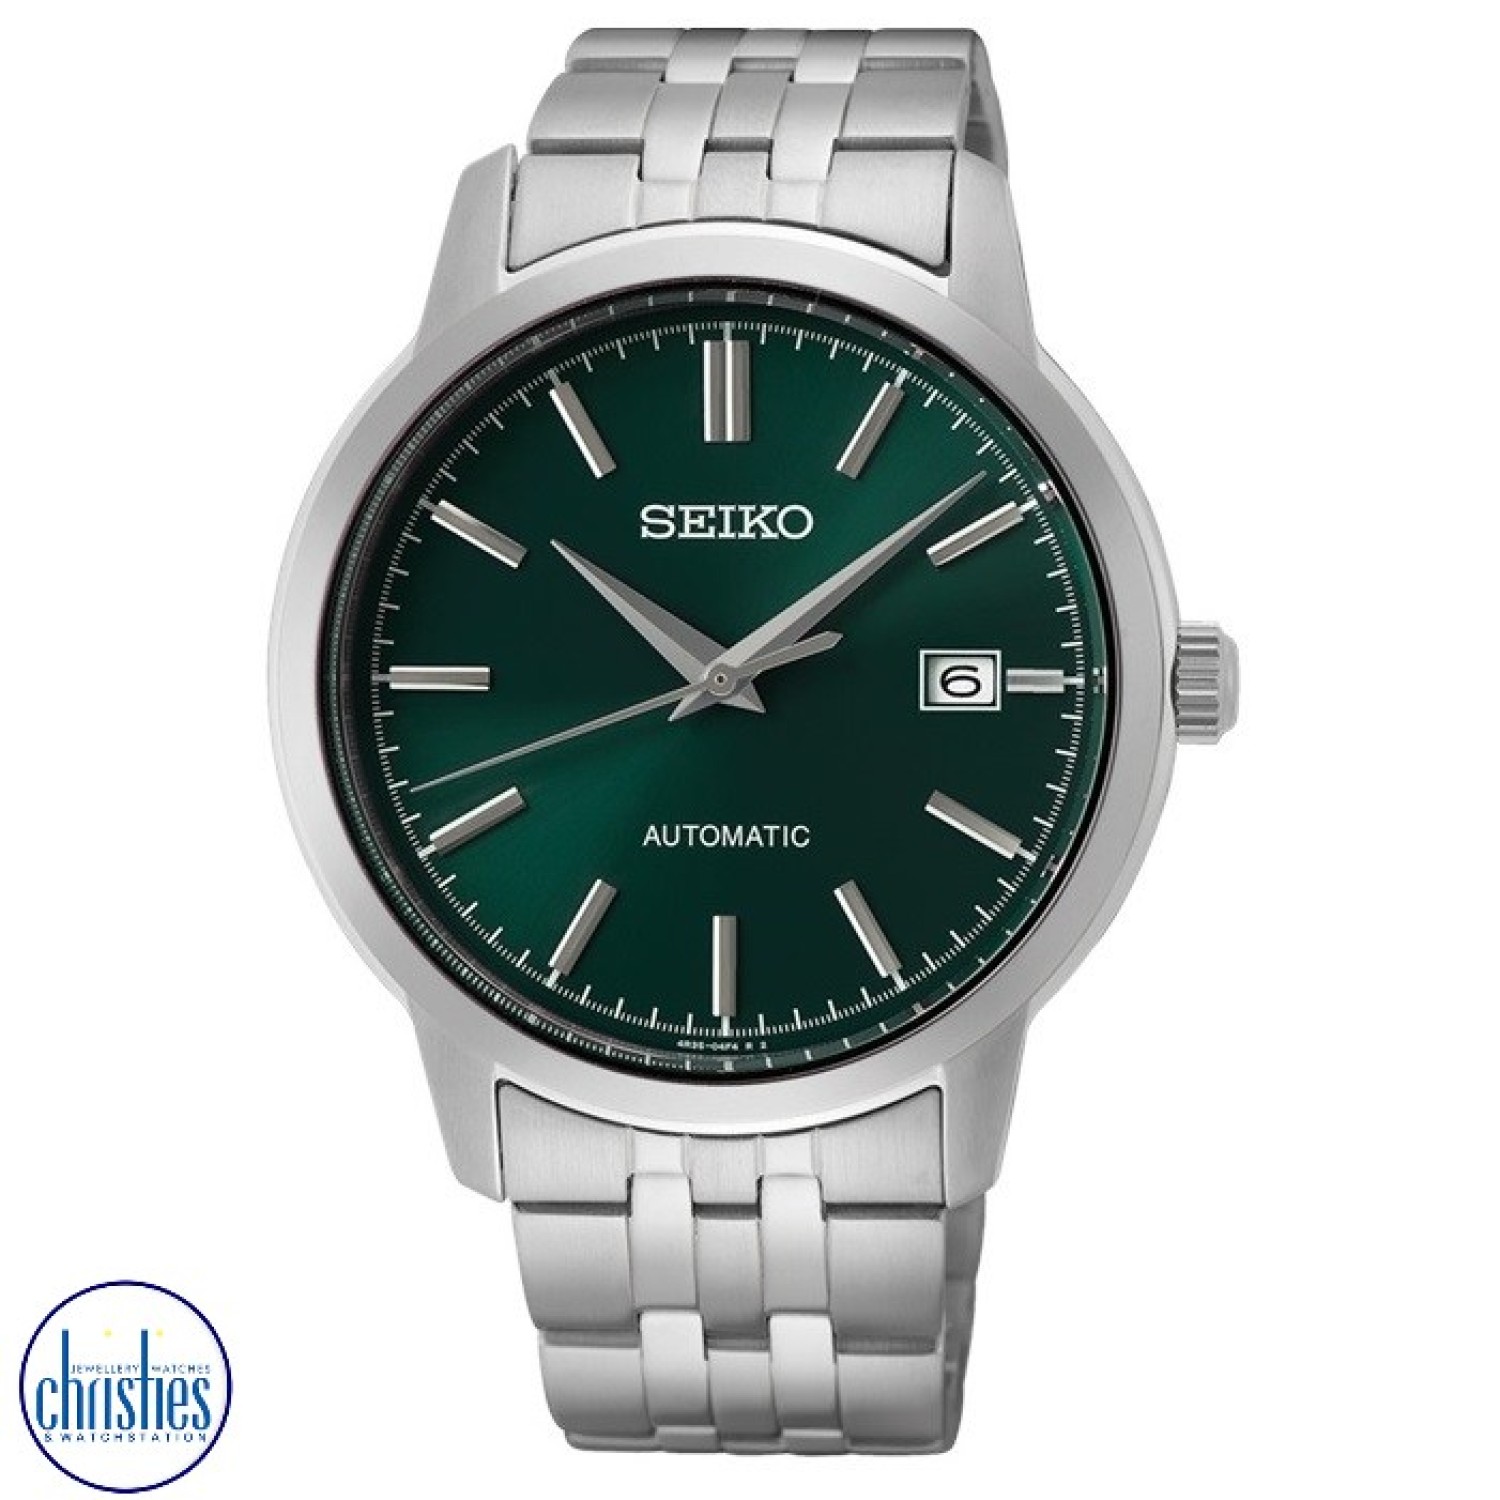 SRPH89K Seiko Mens Automatic Watch. Calibre 4R35 is a high-quality automatic movement watch powered by the wearer's movement, making it incredibly convenient and reliable.